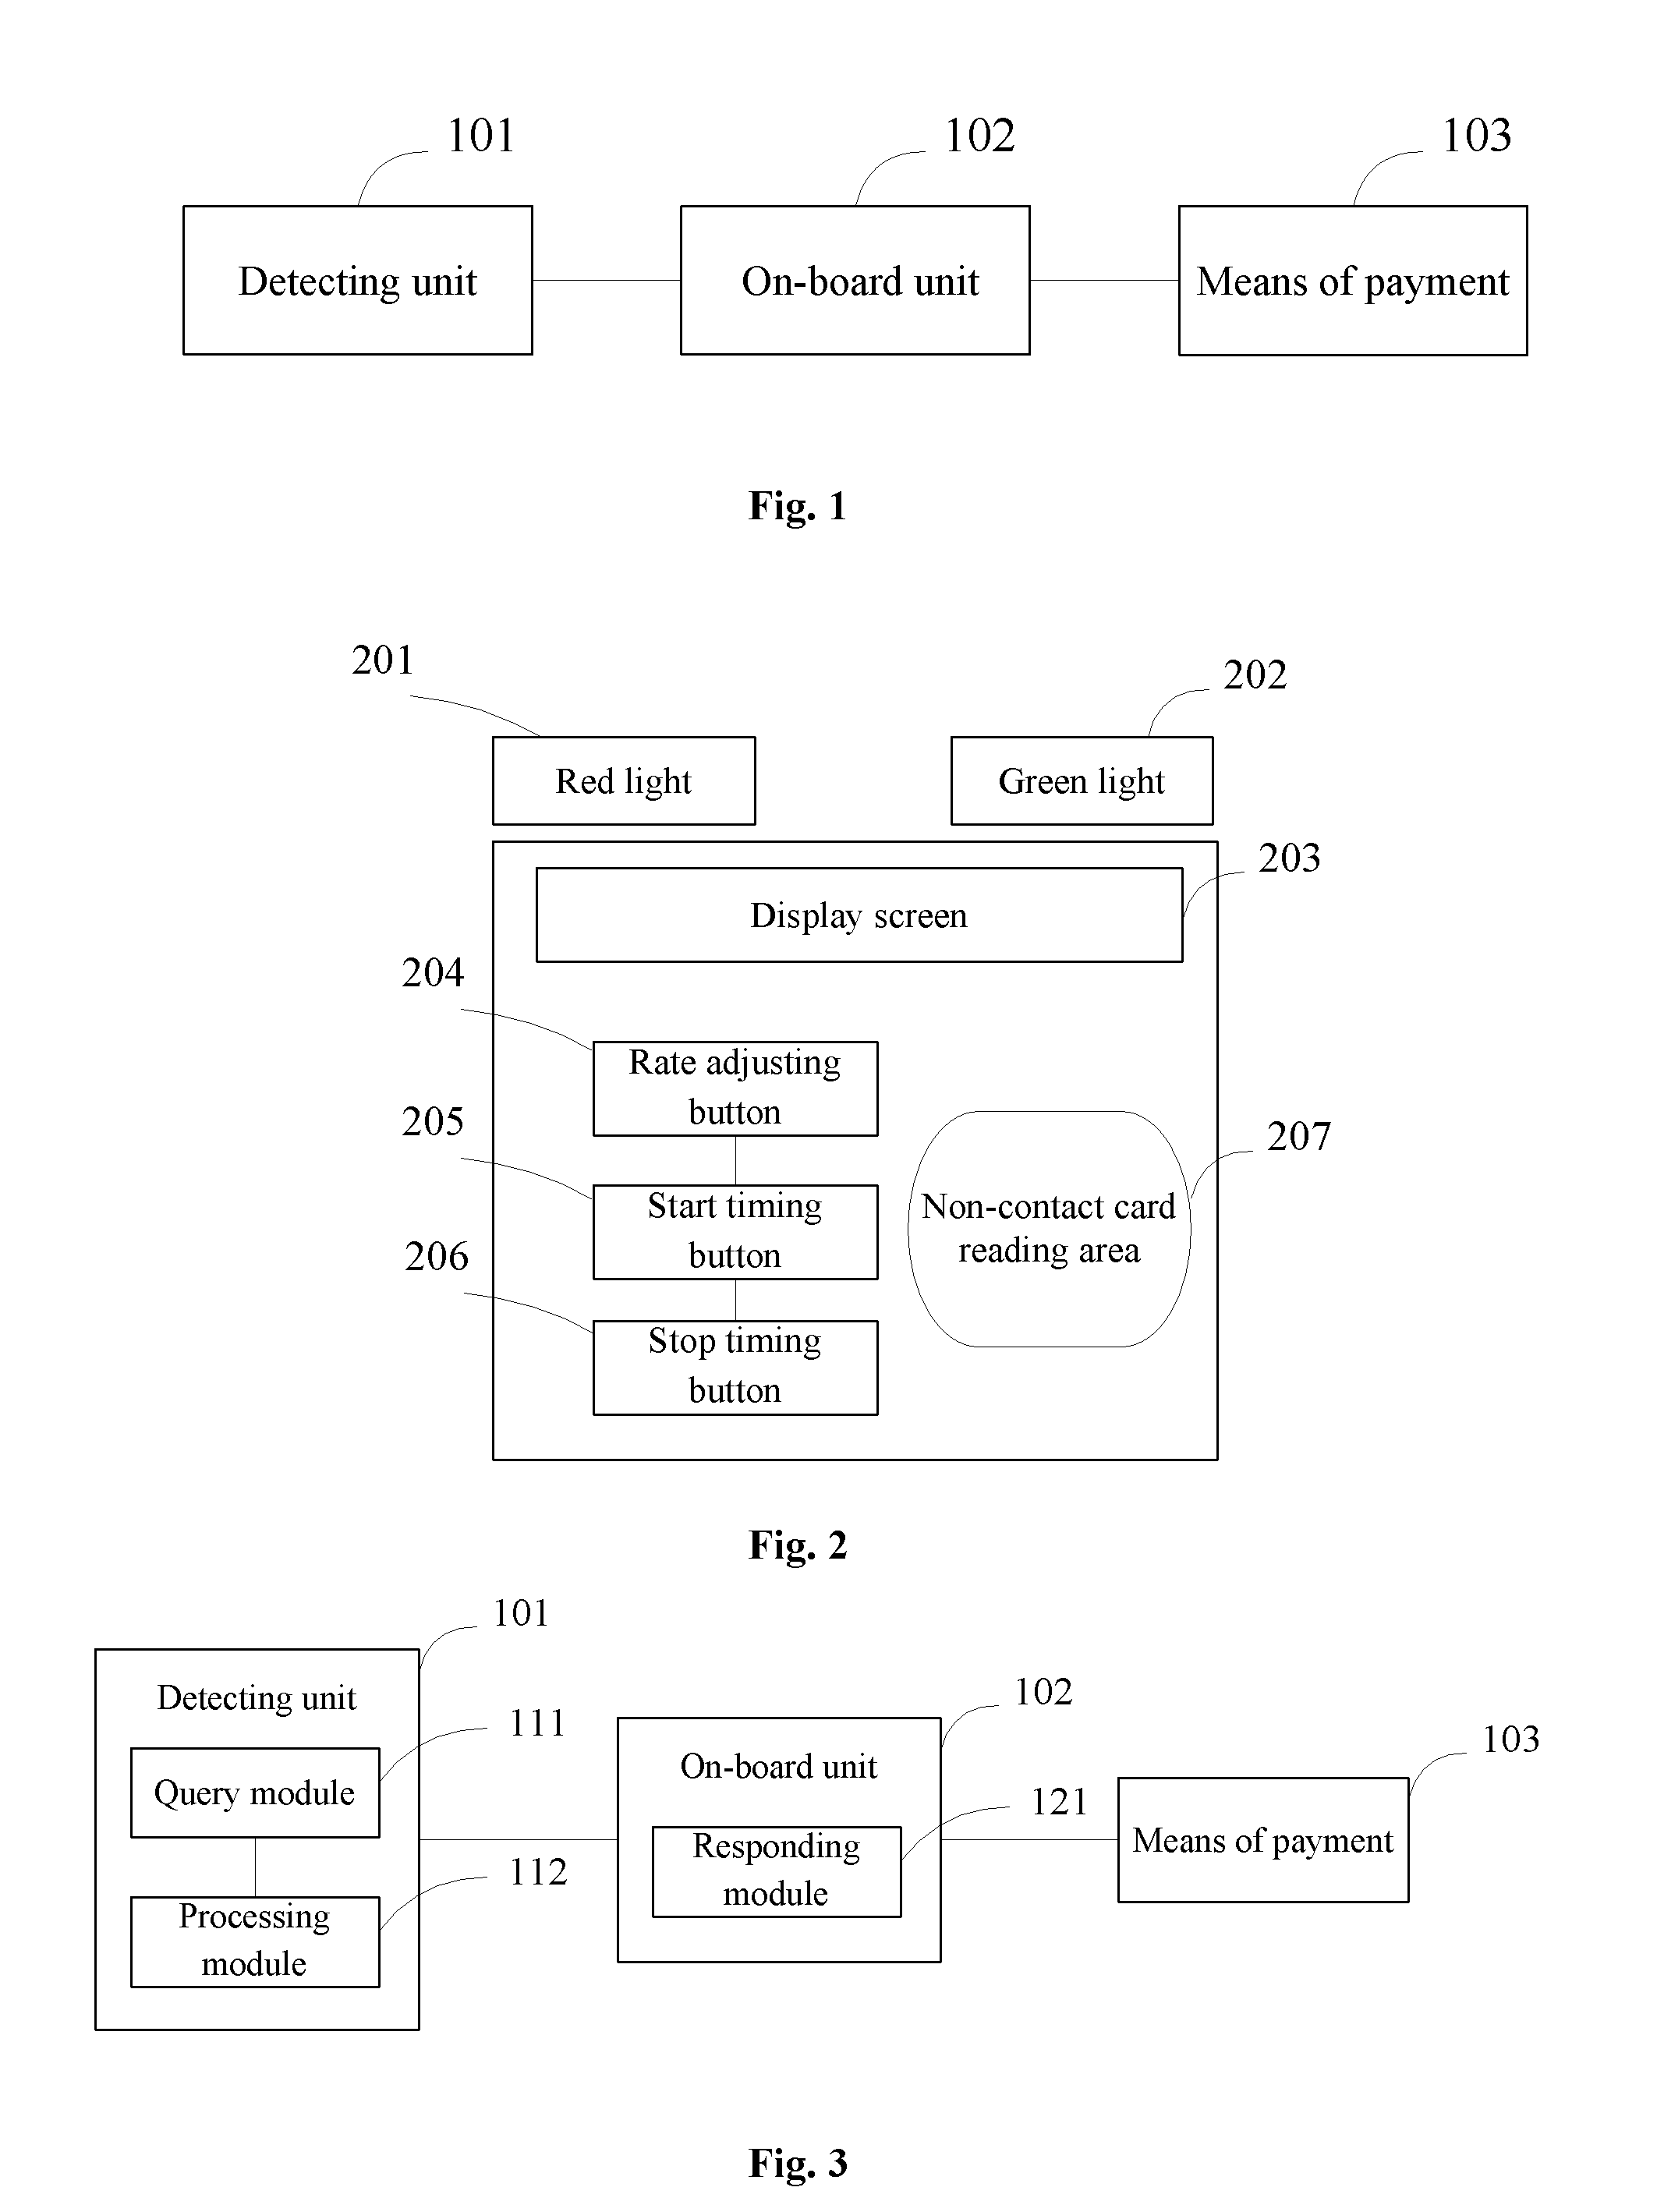 Intelligent charging system and method for use in a parking lot